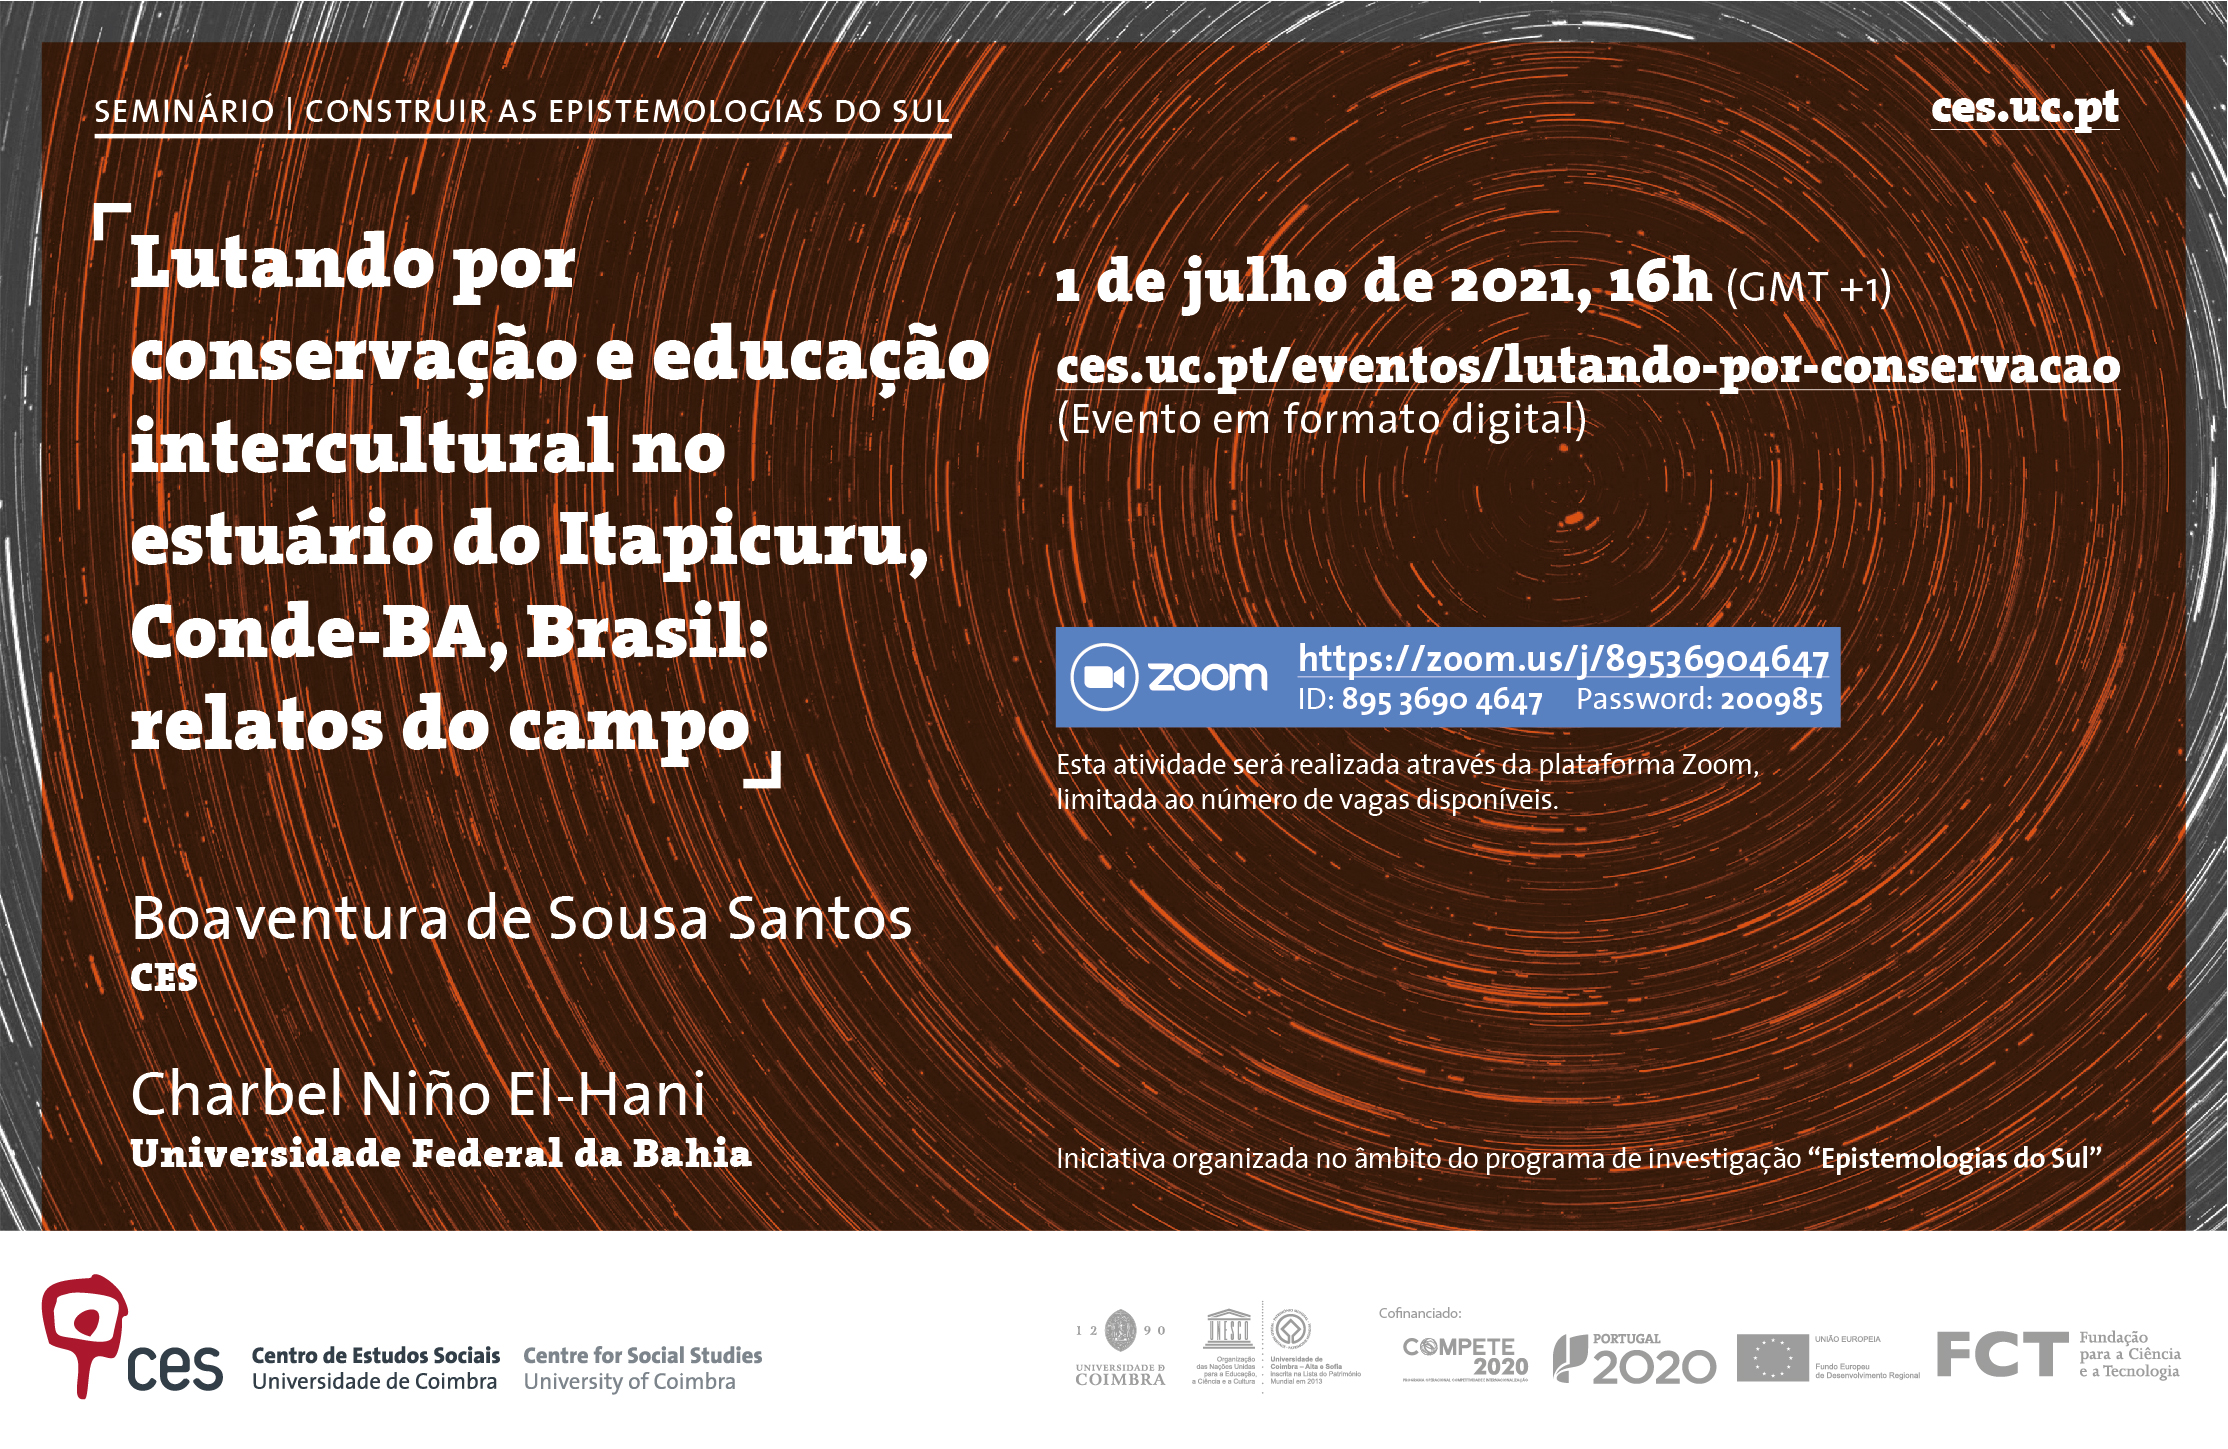 Fighting for conservation and intercultural education in the Itapicuru estuary, Conde-BA, Brazil: stories from the field<span id="edit_33985"><script>$(function() { $('#edit_33985').load( "/myces/user/editobj.php?tipo=evento&id=33985" ); });</script></span>